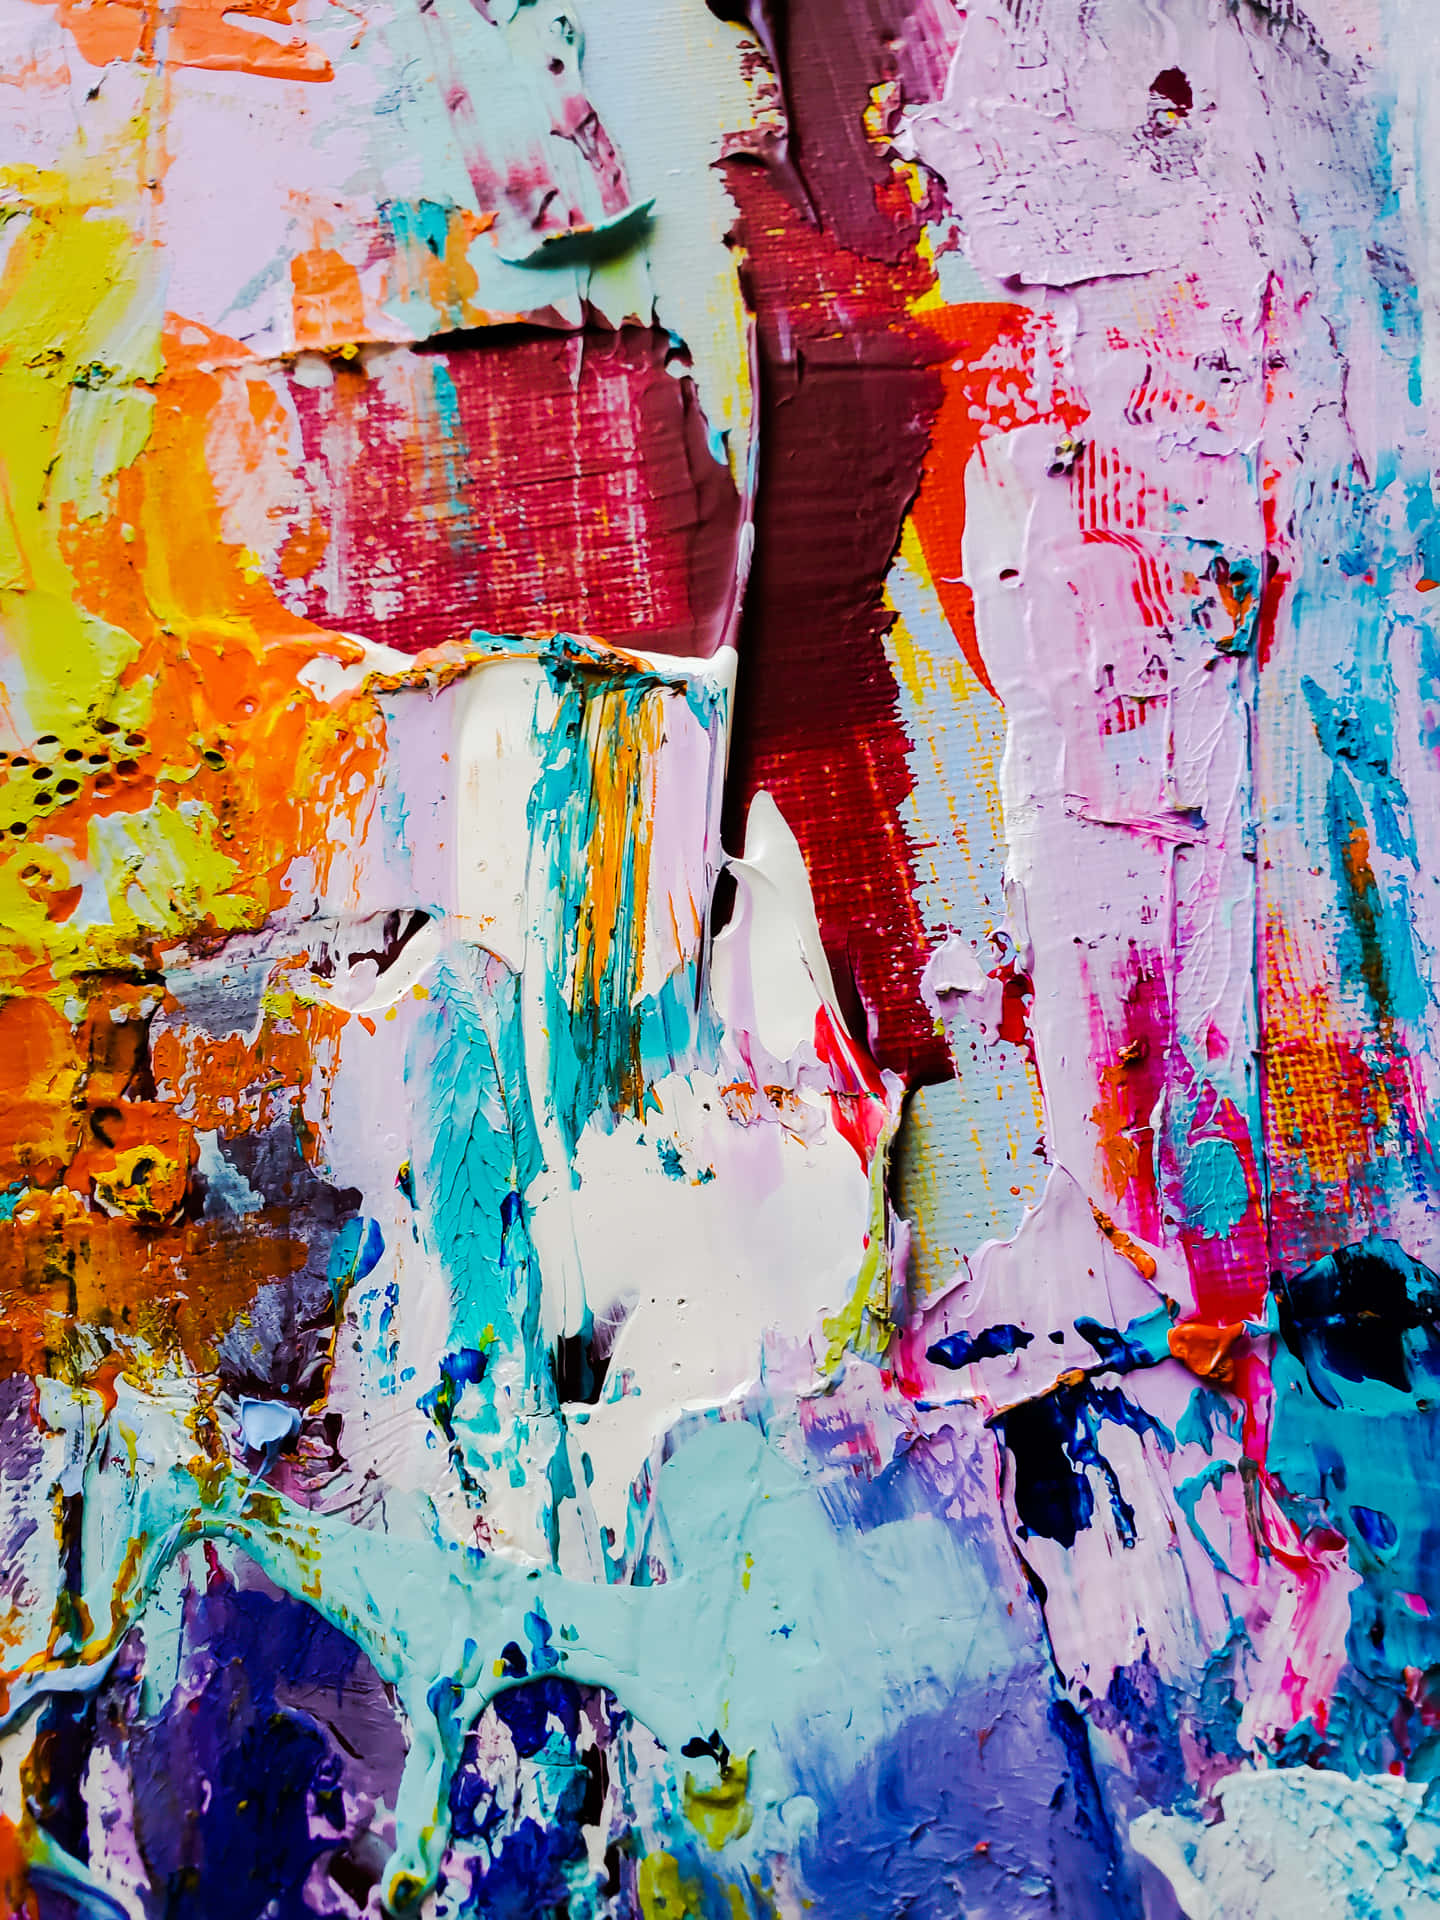 Let Your Imagination Run Wild With This Colorful Abstract Art Background